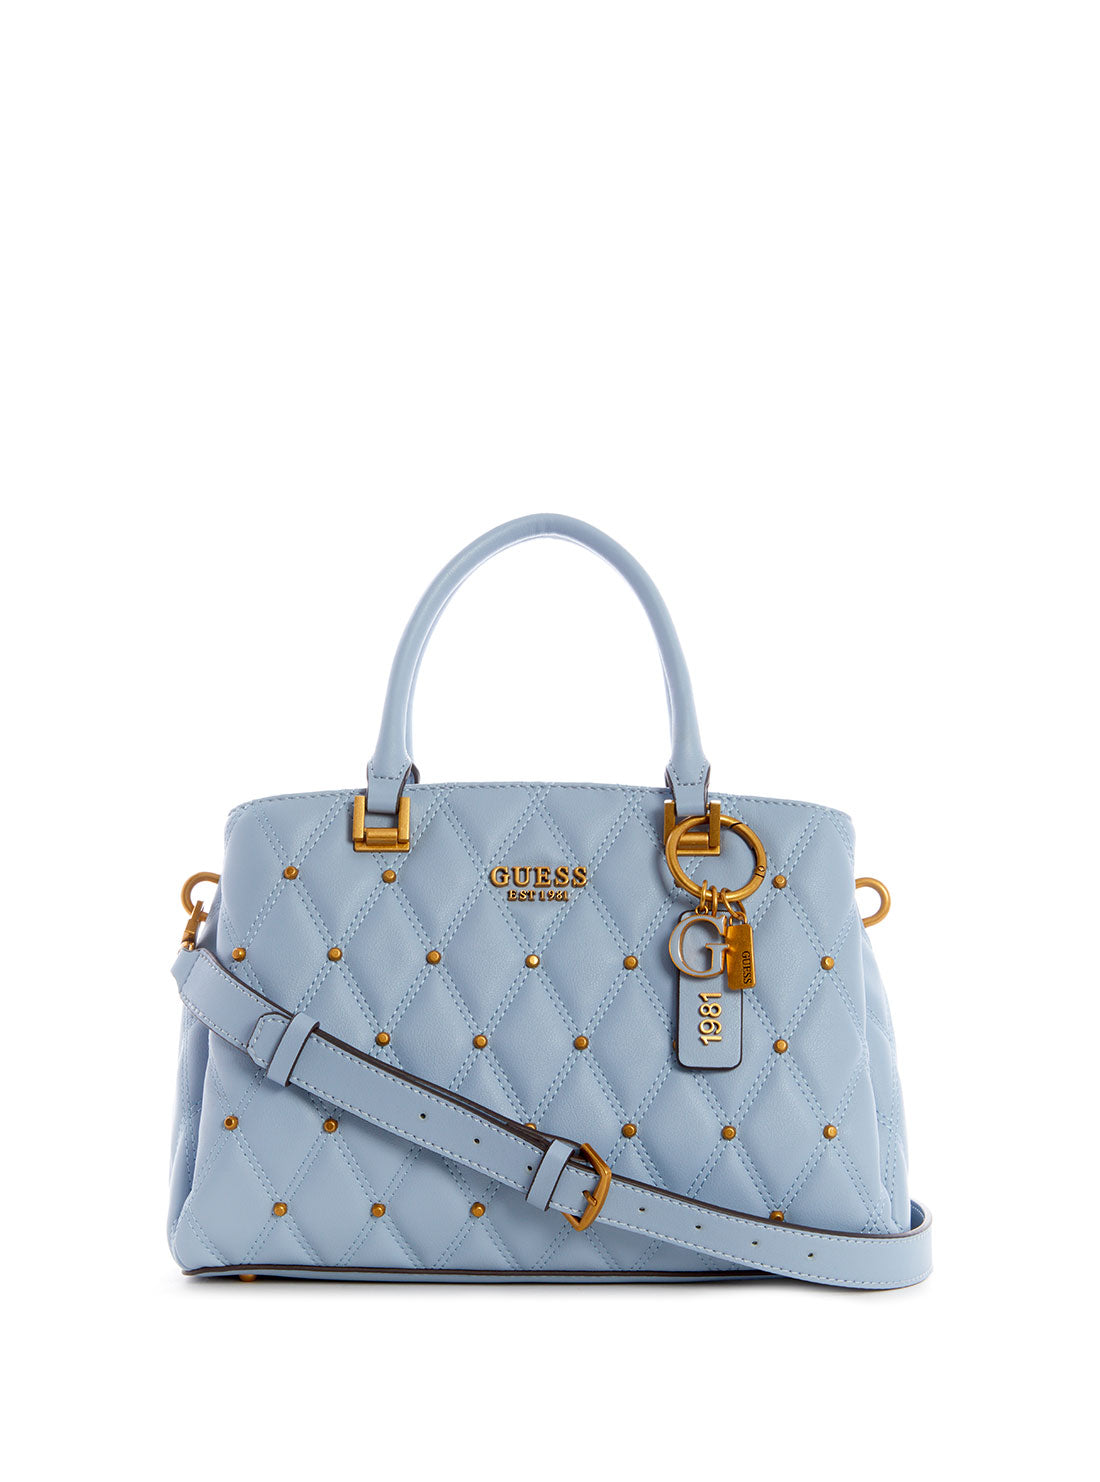 GUESS Womens Blue Triana Three Compartment Satchel QS855306 Front View